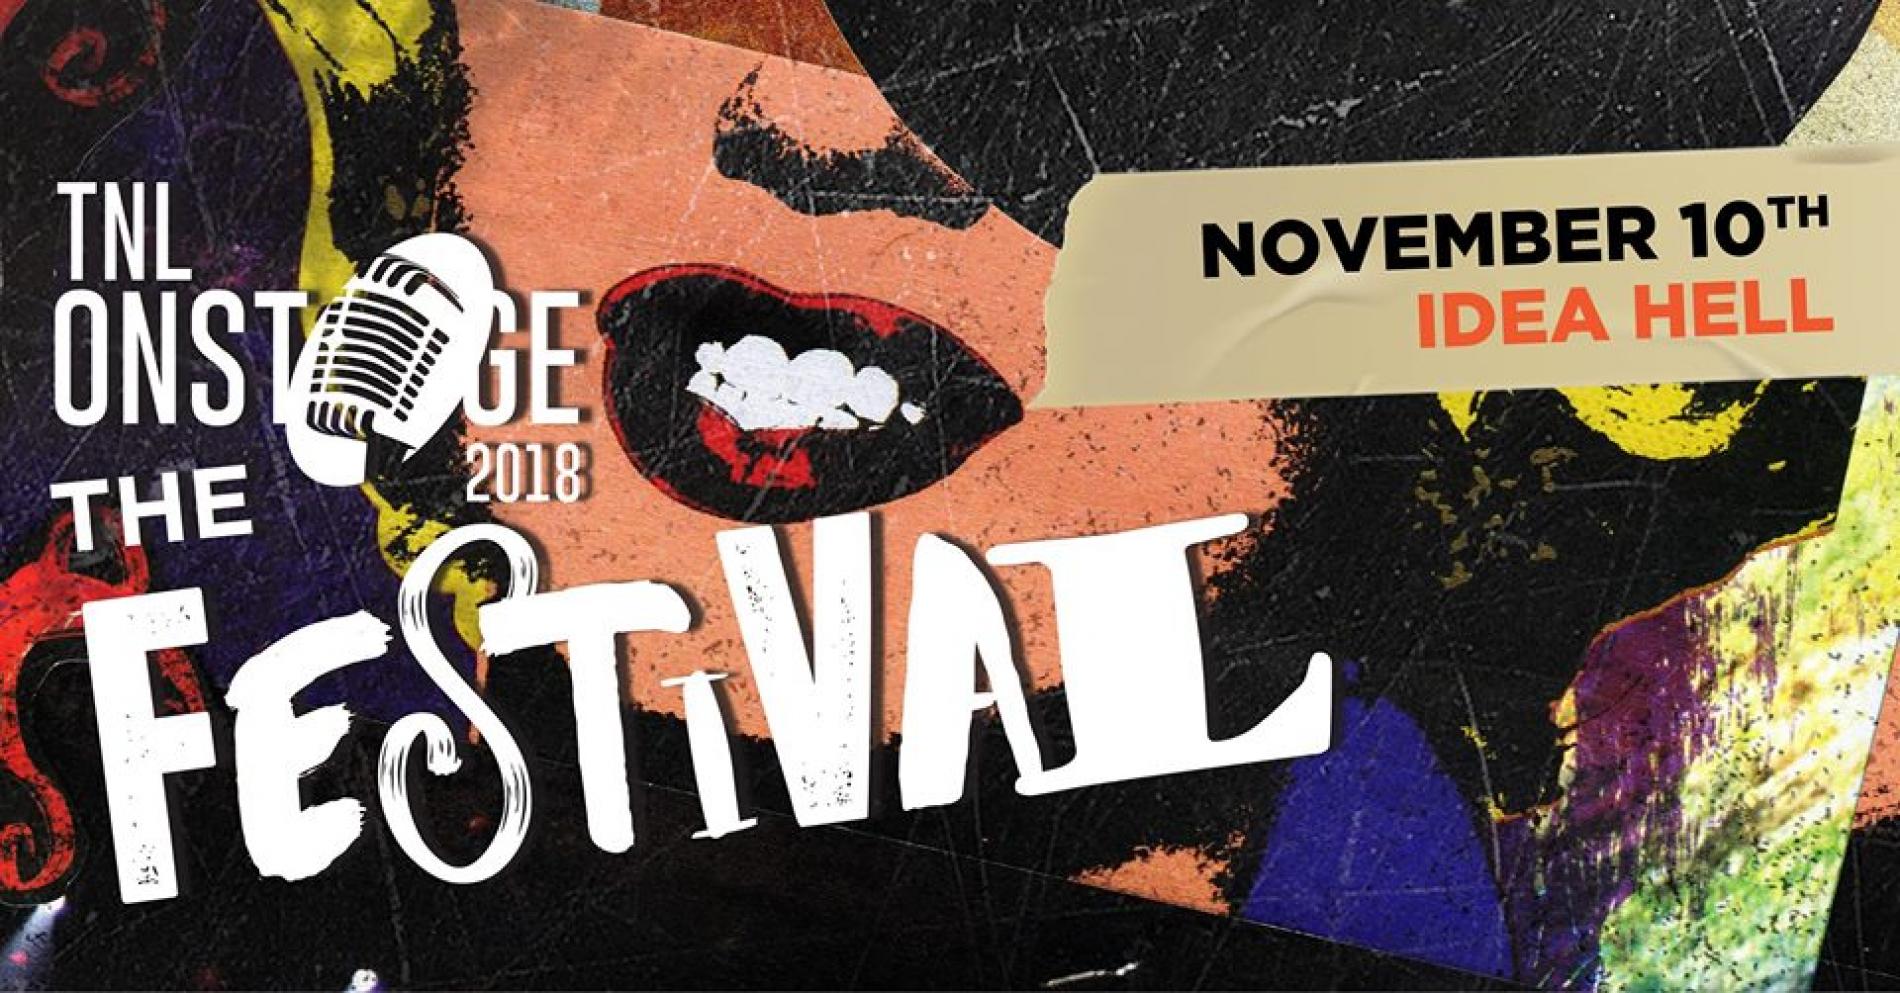 TNL Onstage – The Festival